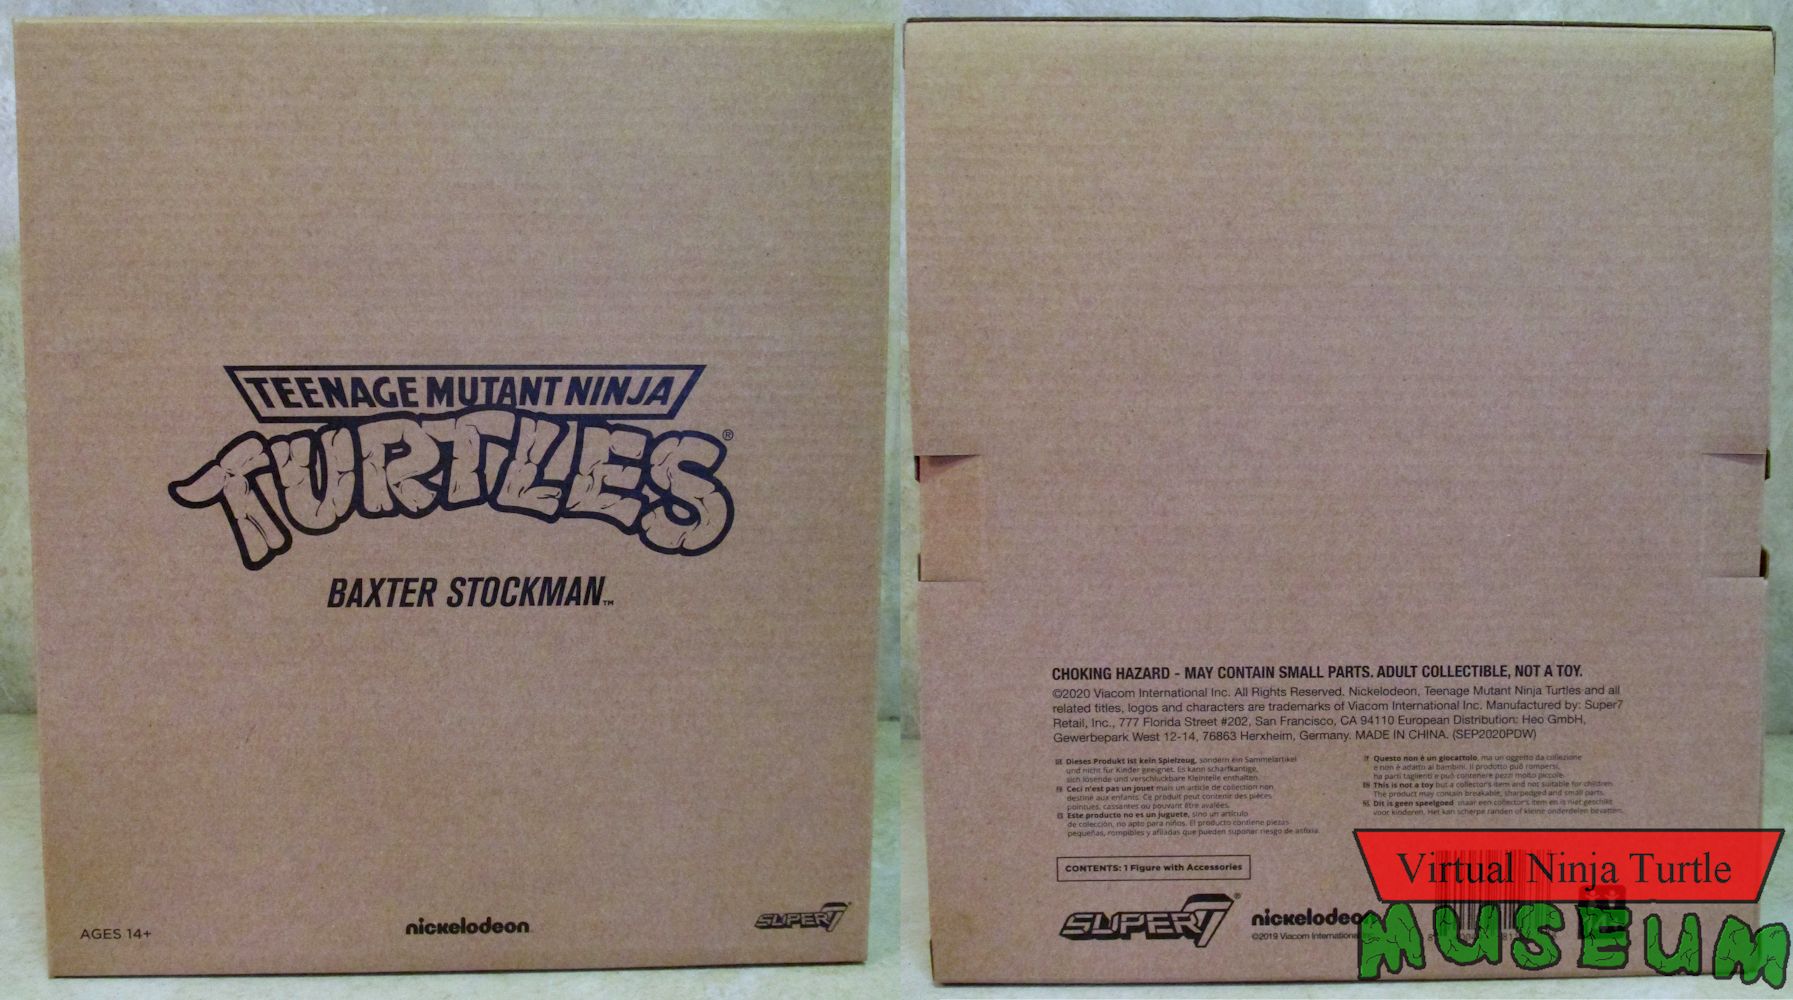 Shipper Box front and back